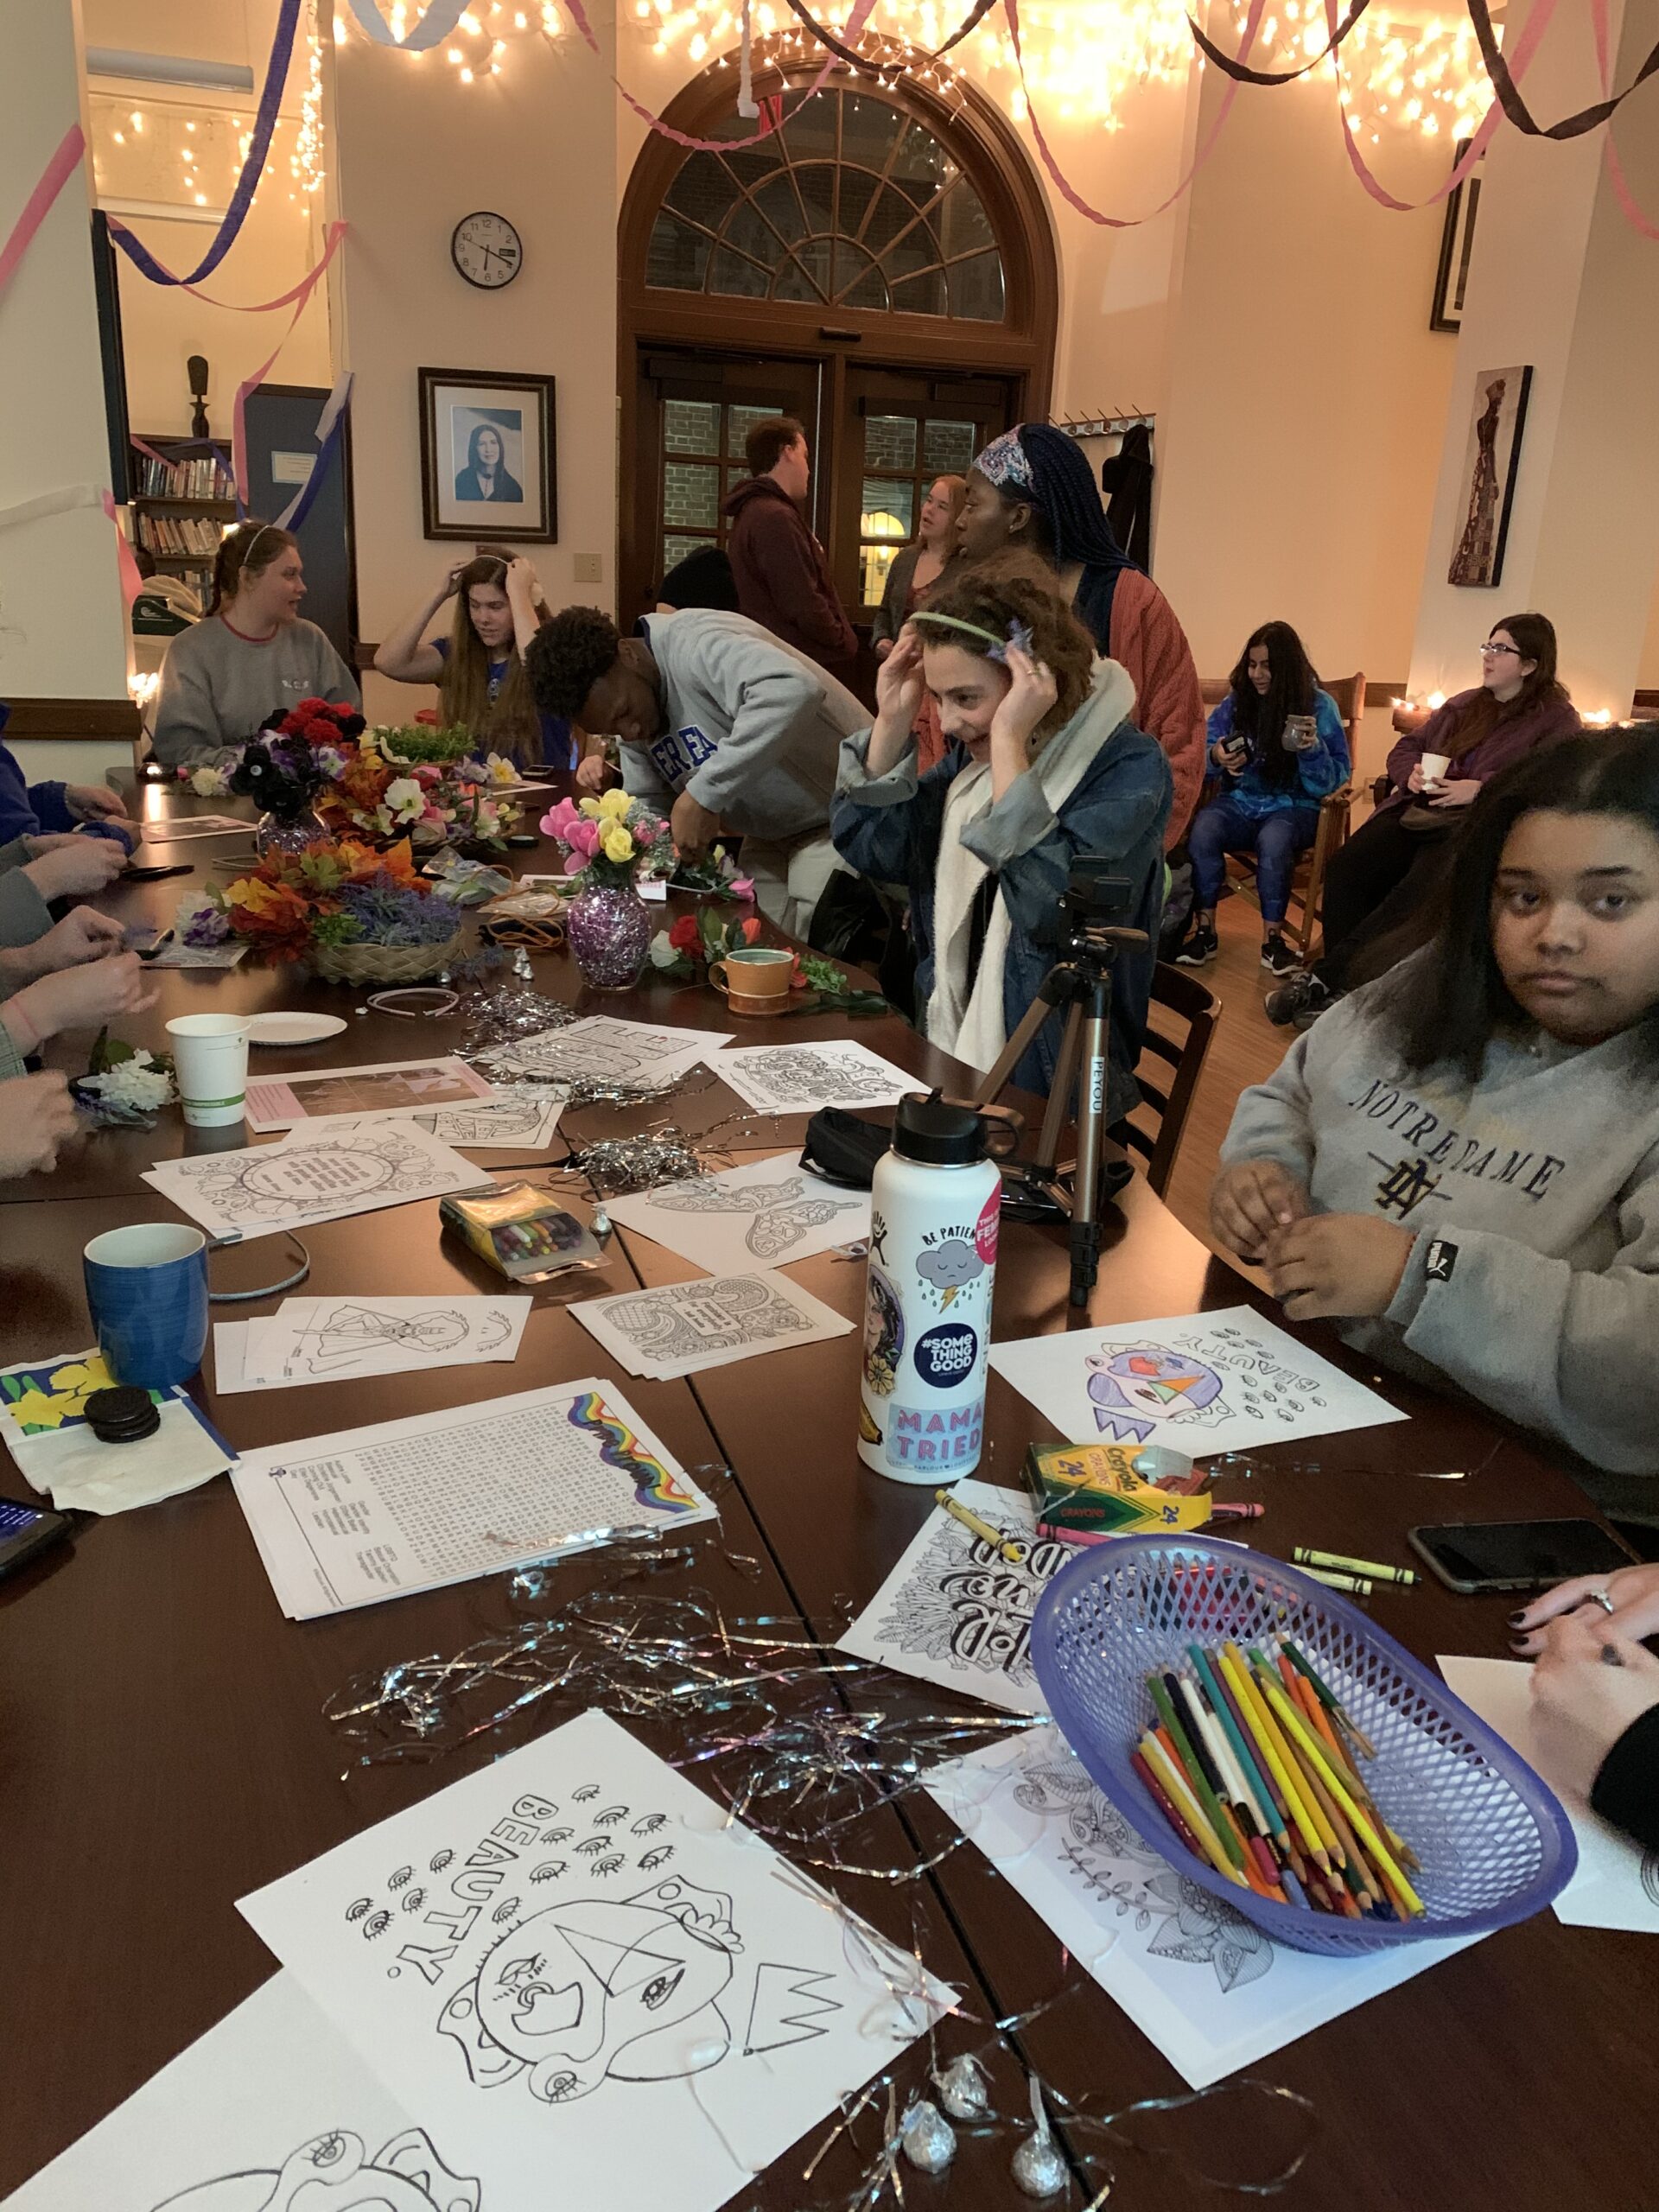 Students making crafts in the Women's and Gender Non-Conforming Center